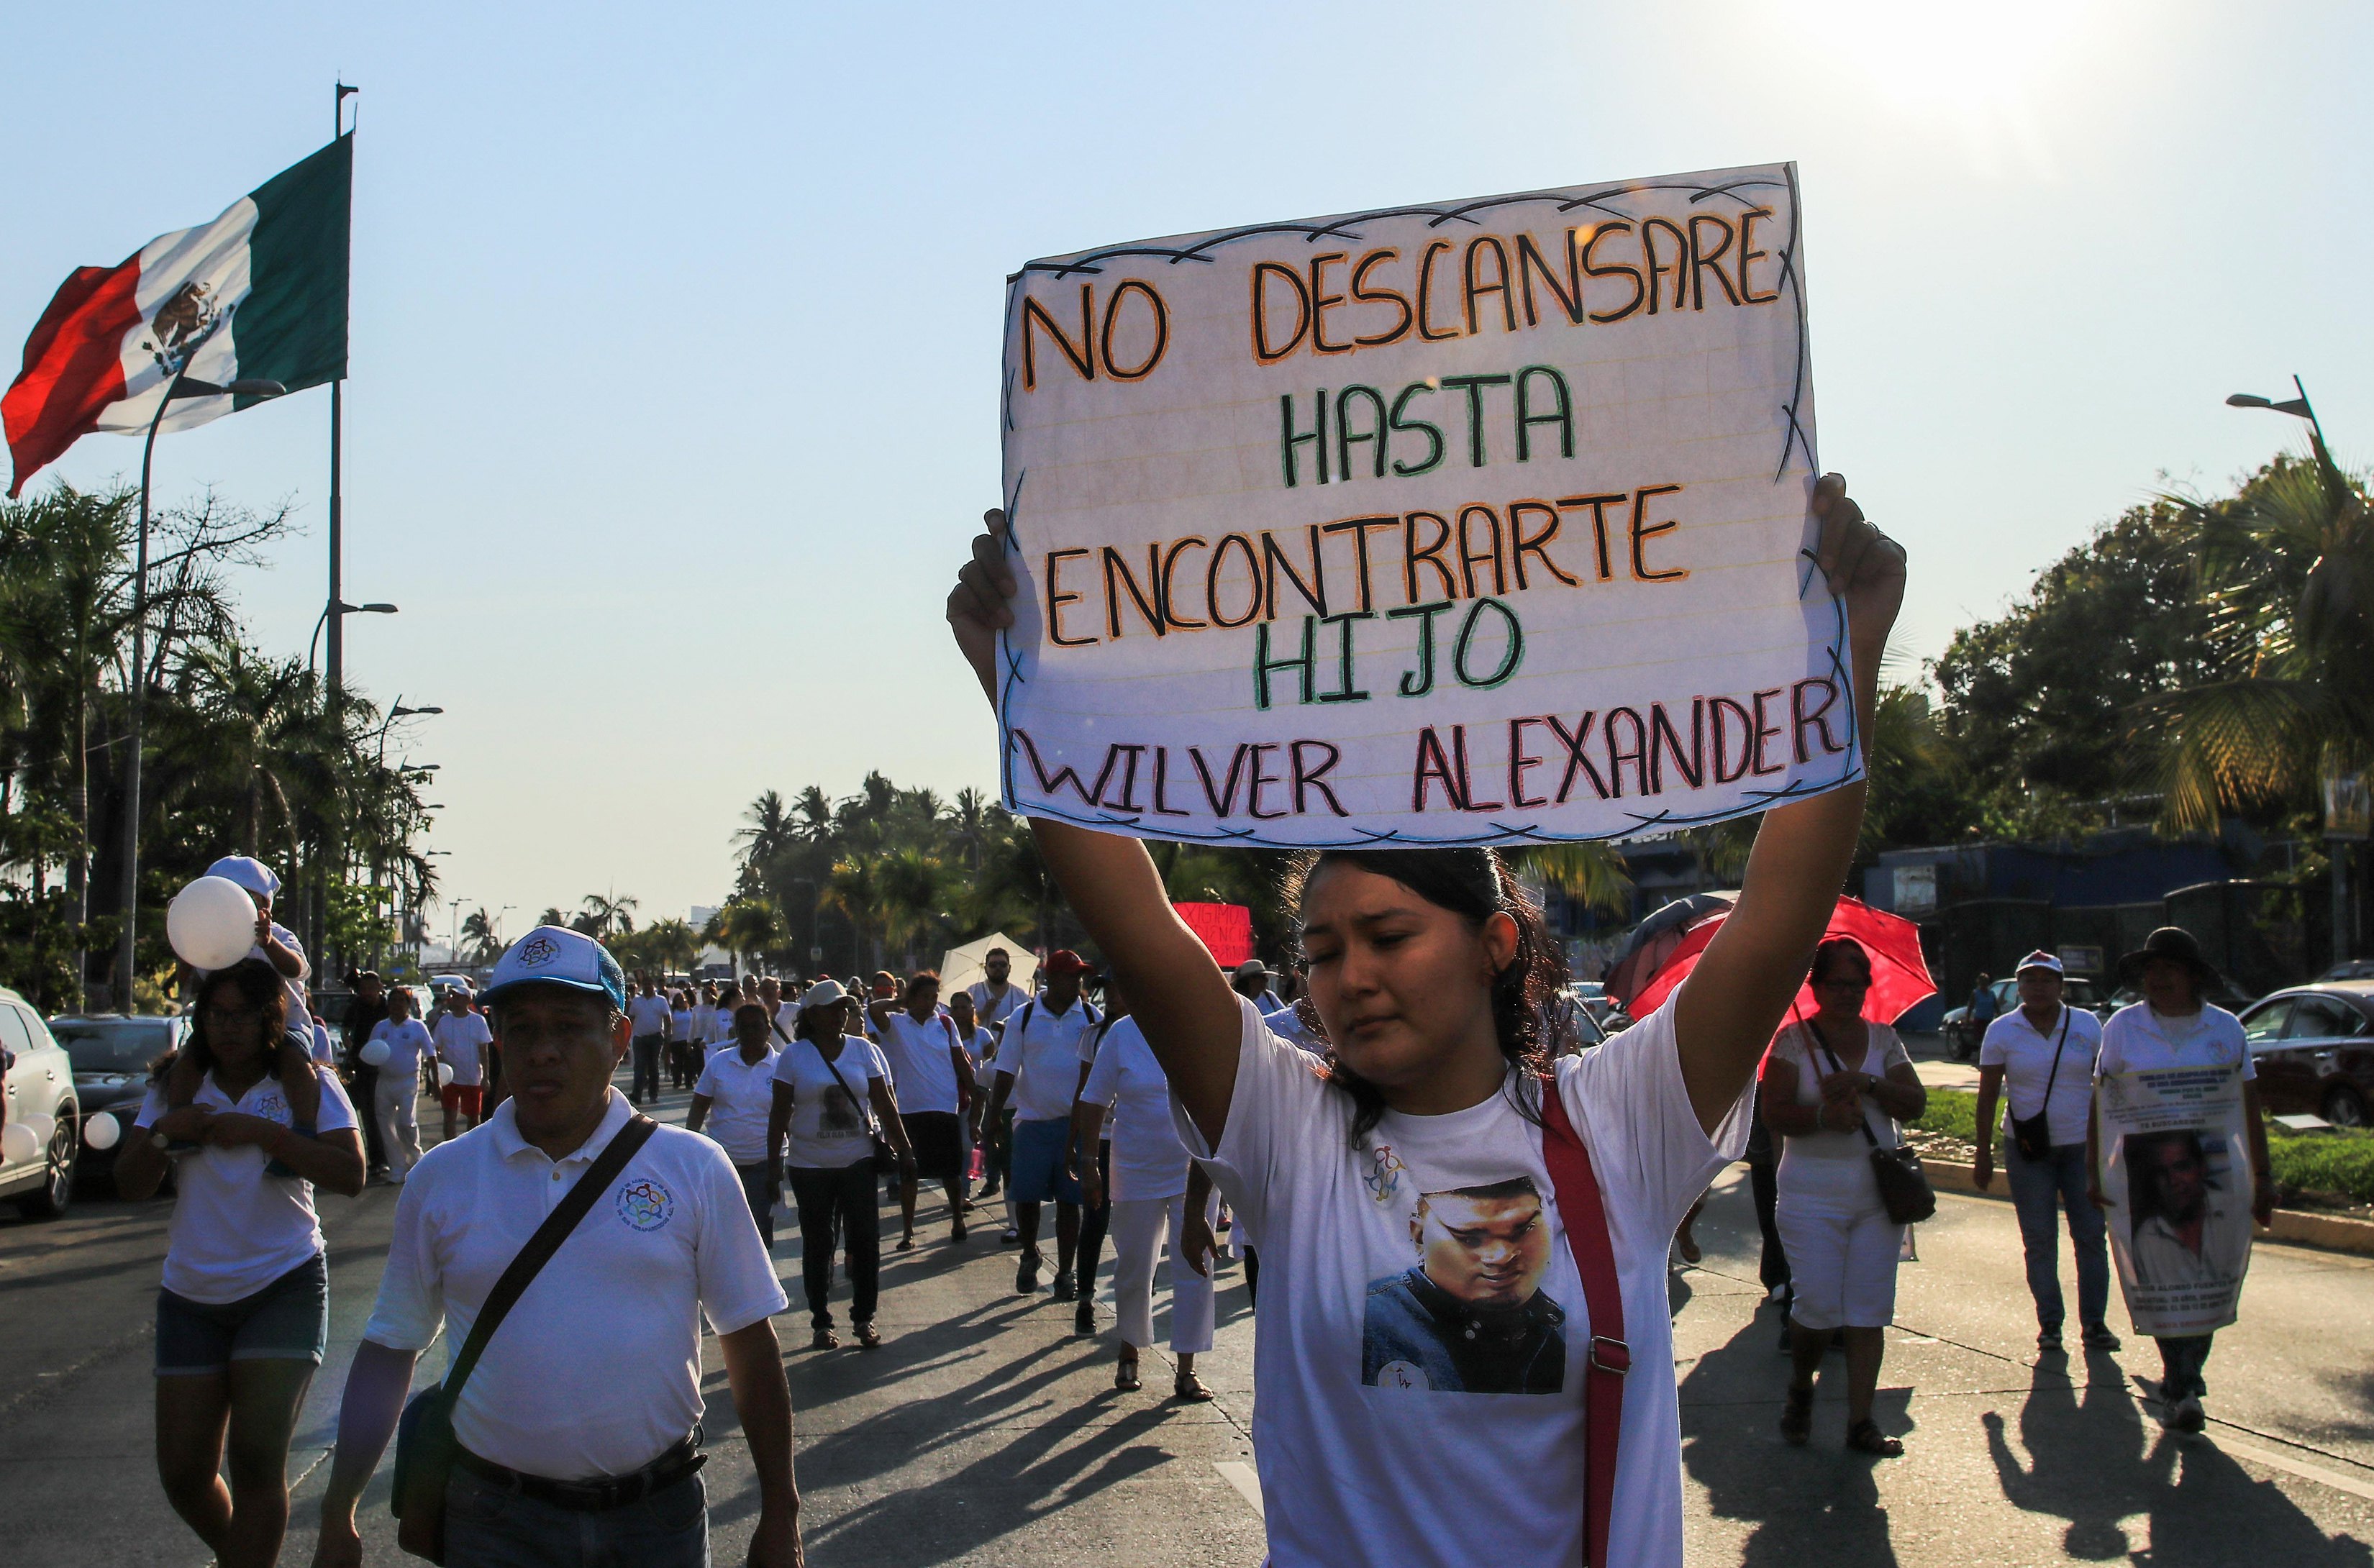 epa06602095 Members of the Third International Caravan of Search for the Disappeared protest through the main streets of the port of Acapulco, Guerrero, Mexico, 13 March 2018. Relatives of the 43 disappeared students of the Ayotzinapa teachers' school protested that the recent arrest of Erick Uriel Sandoval, known as 'the Frog', allegedly linked to the disappearance of the youth, is irrelevant.  EPA/DAVID GUZMAN